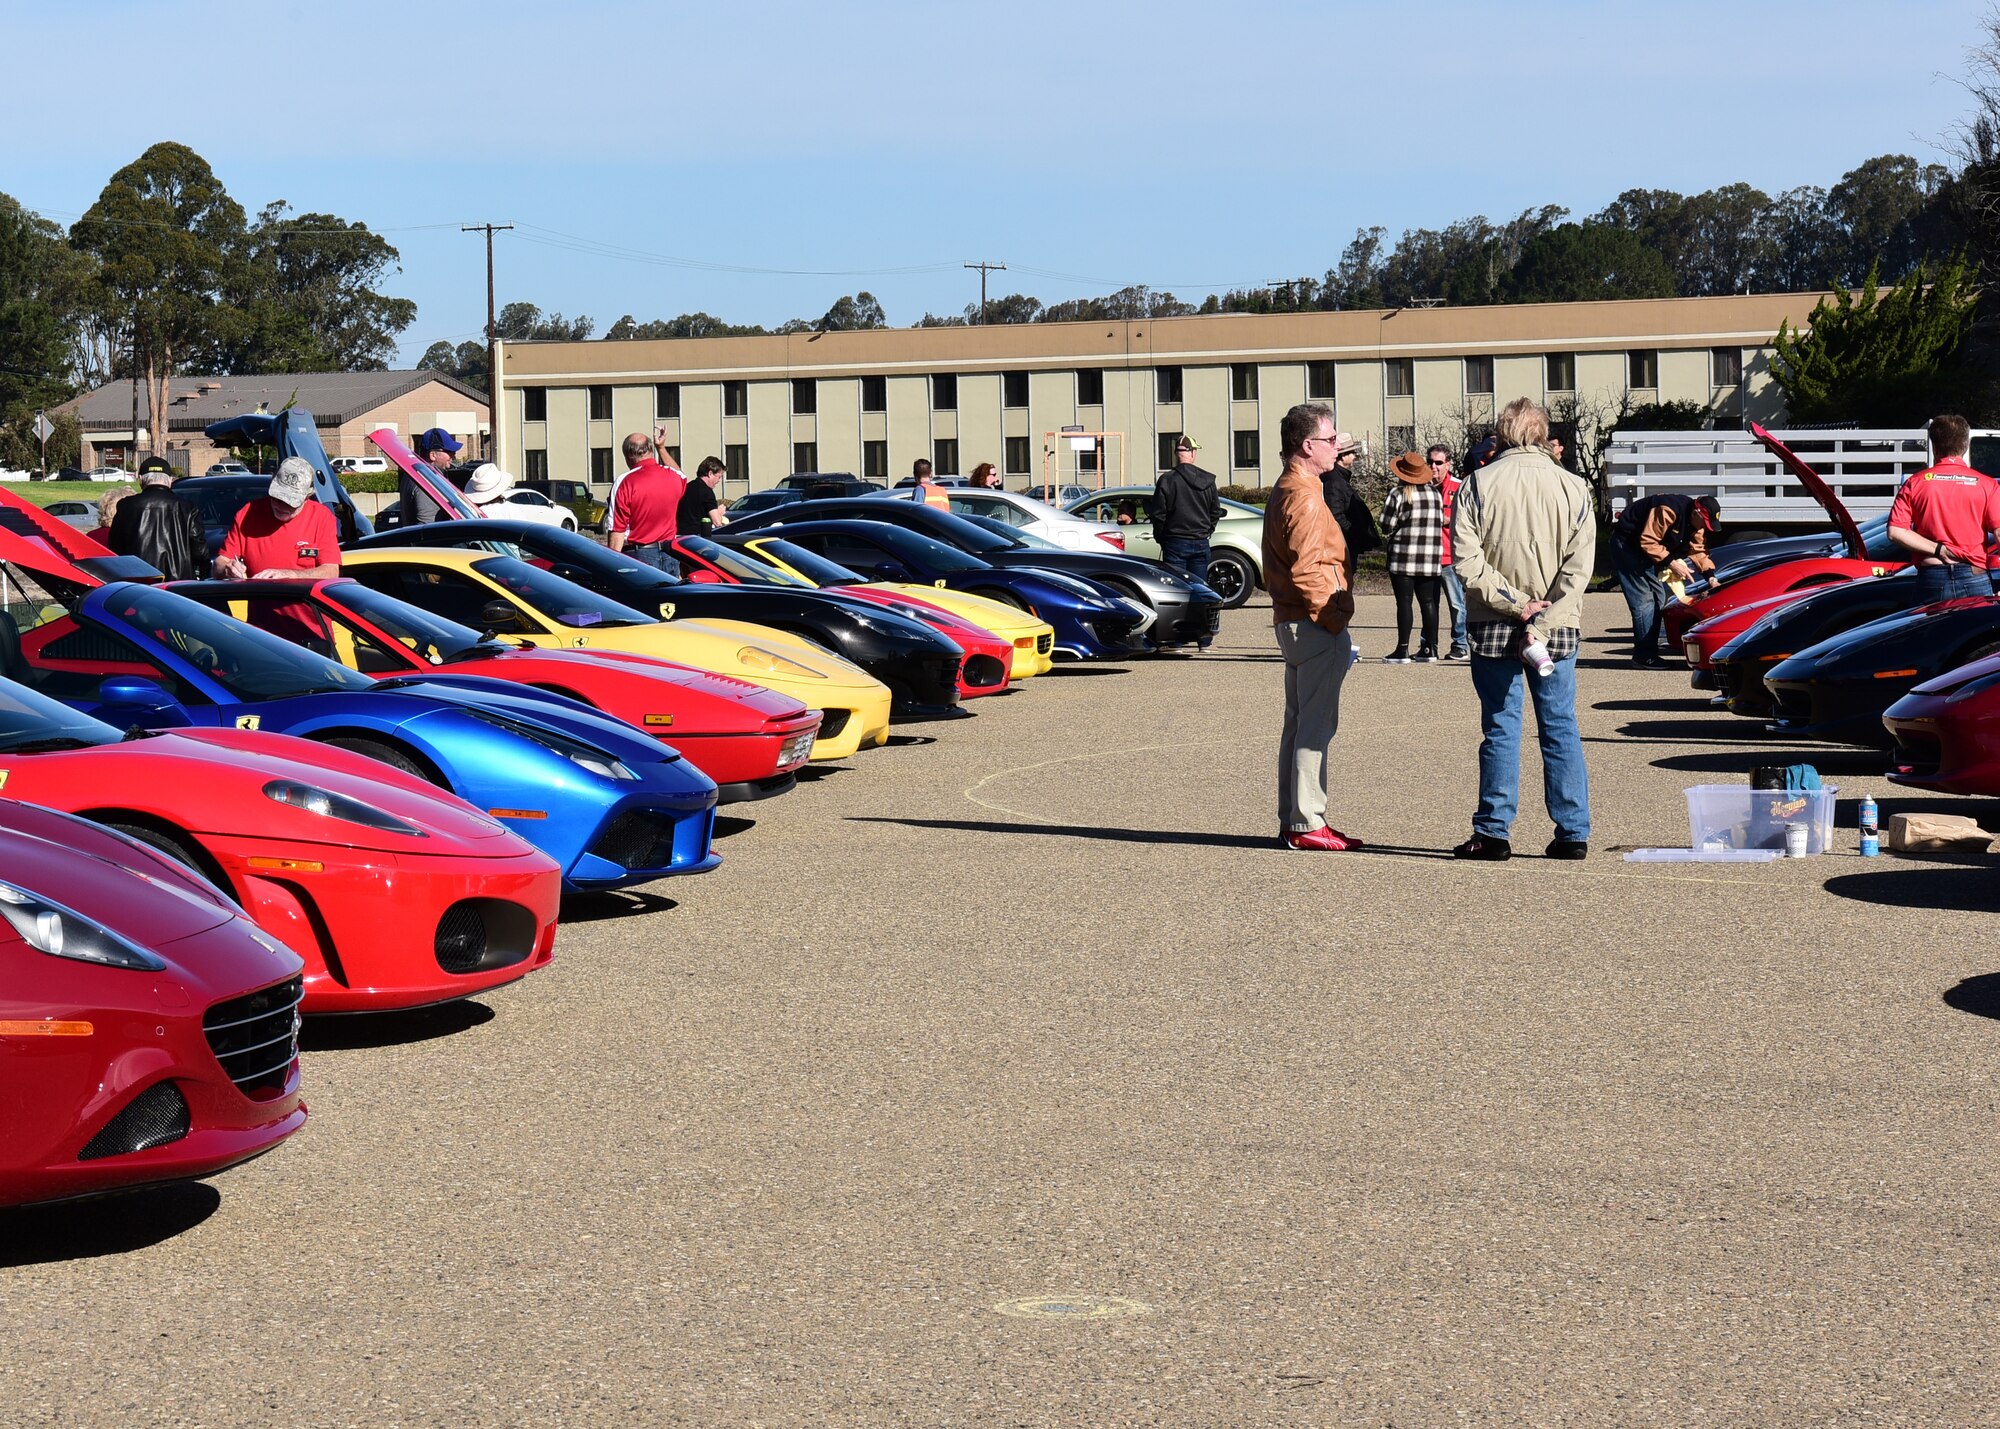 Base members view exotic and classic cars on display during Vandenberg’s Ninth Annual Exotic Car Show Oct. 23, 2021, at Vandenberg Space Force Base, Calif. The 30th Force Support Squadron hosted the event which displayed Ferrari’s, Lamborghini’s and other exotic and classic cars. (U.S. Space Force photo by Airman First Class Tiarra Sibley)